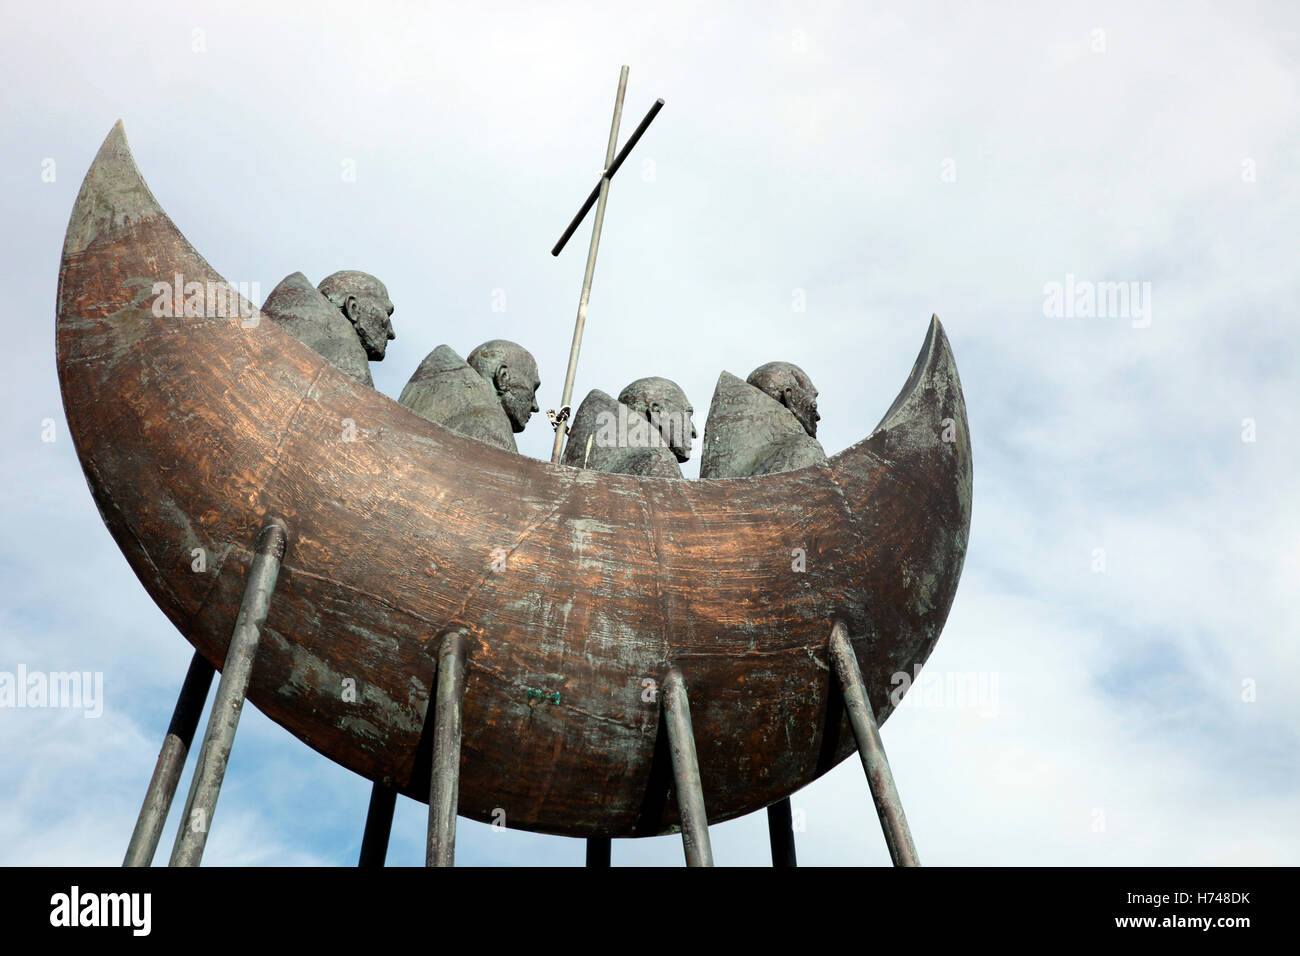 Sculpture of the Skelligs monks, Caherciveen, Co. Kerry Stock Photo